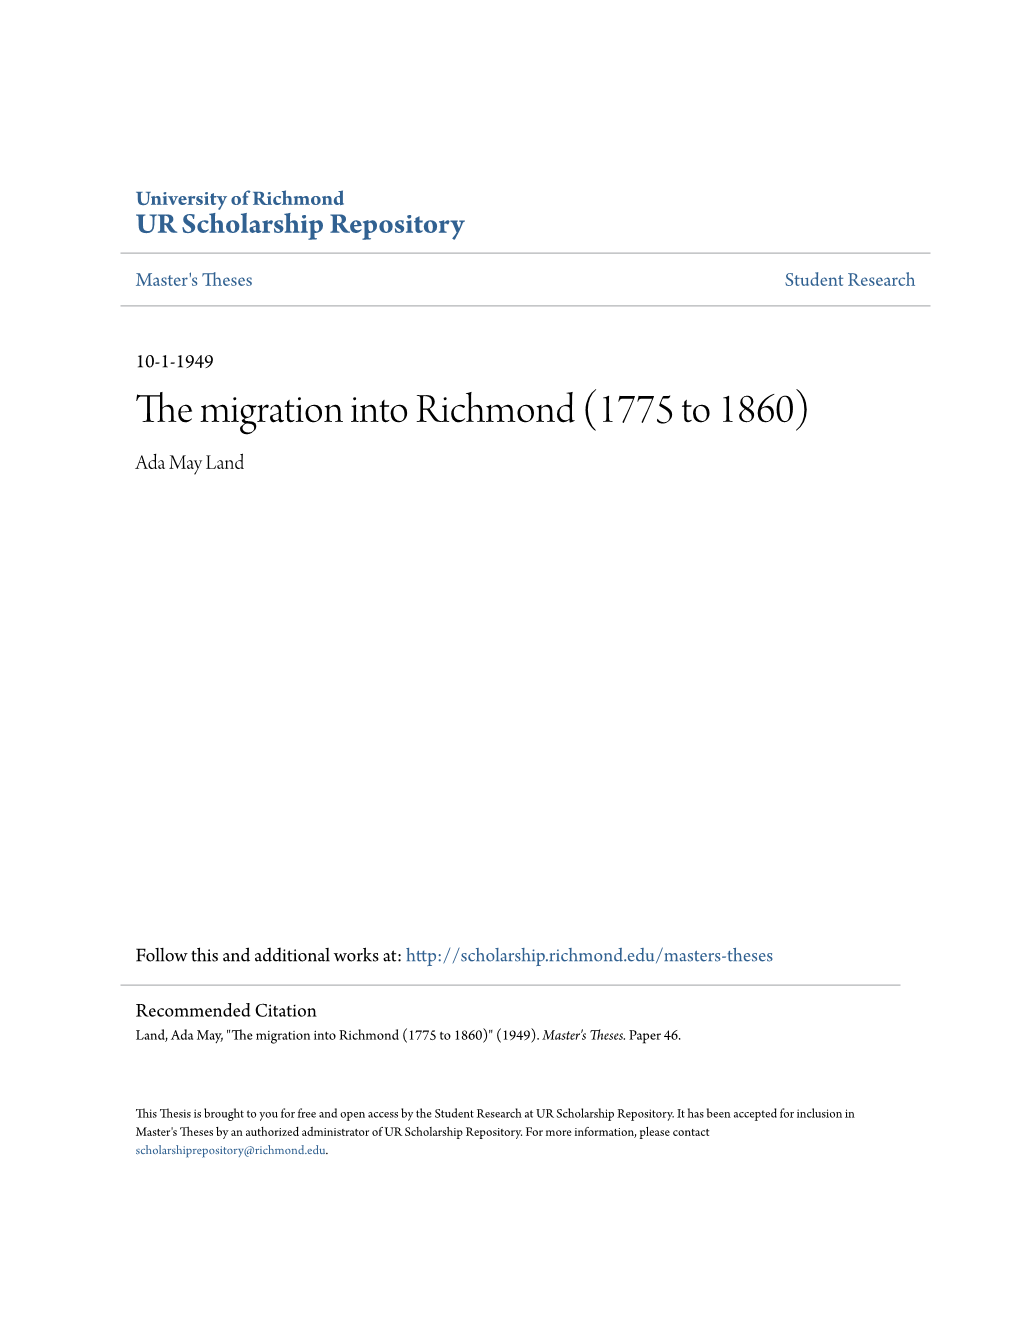 The Migration Into Richmond (1775 to 1860) Ada May Land